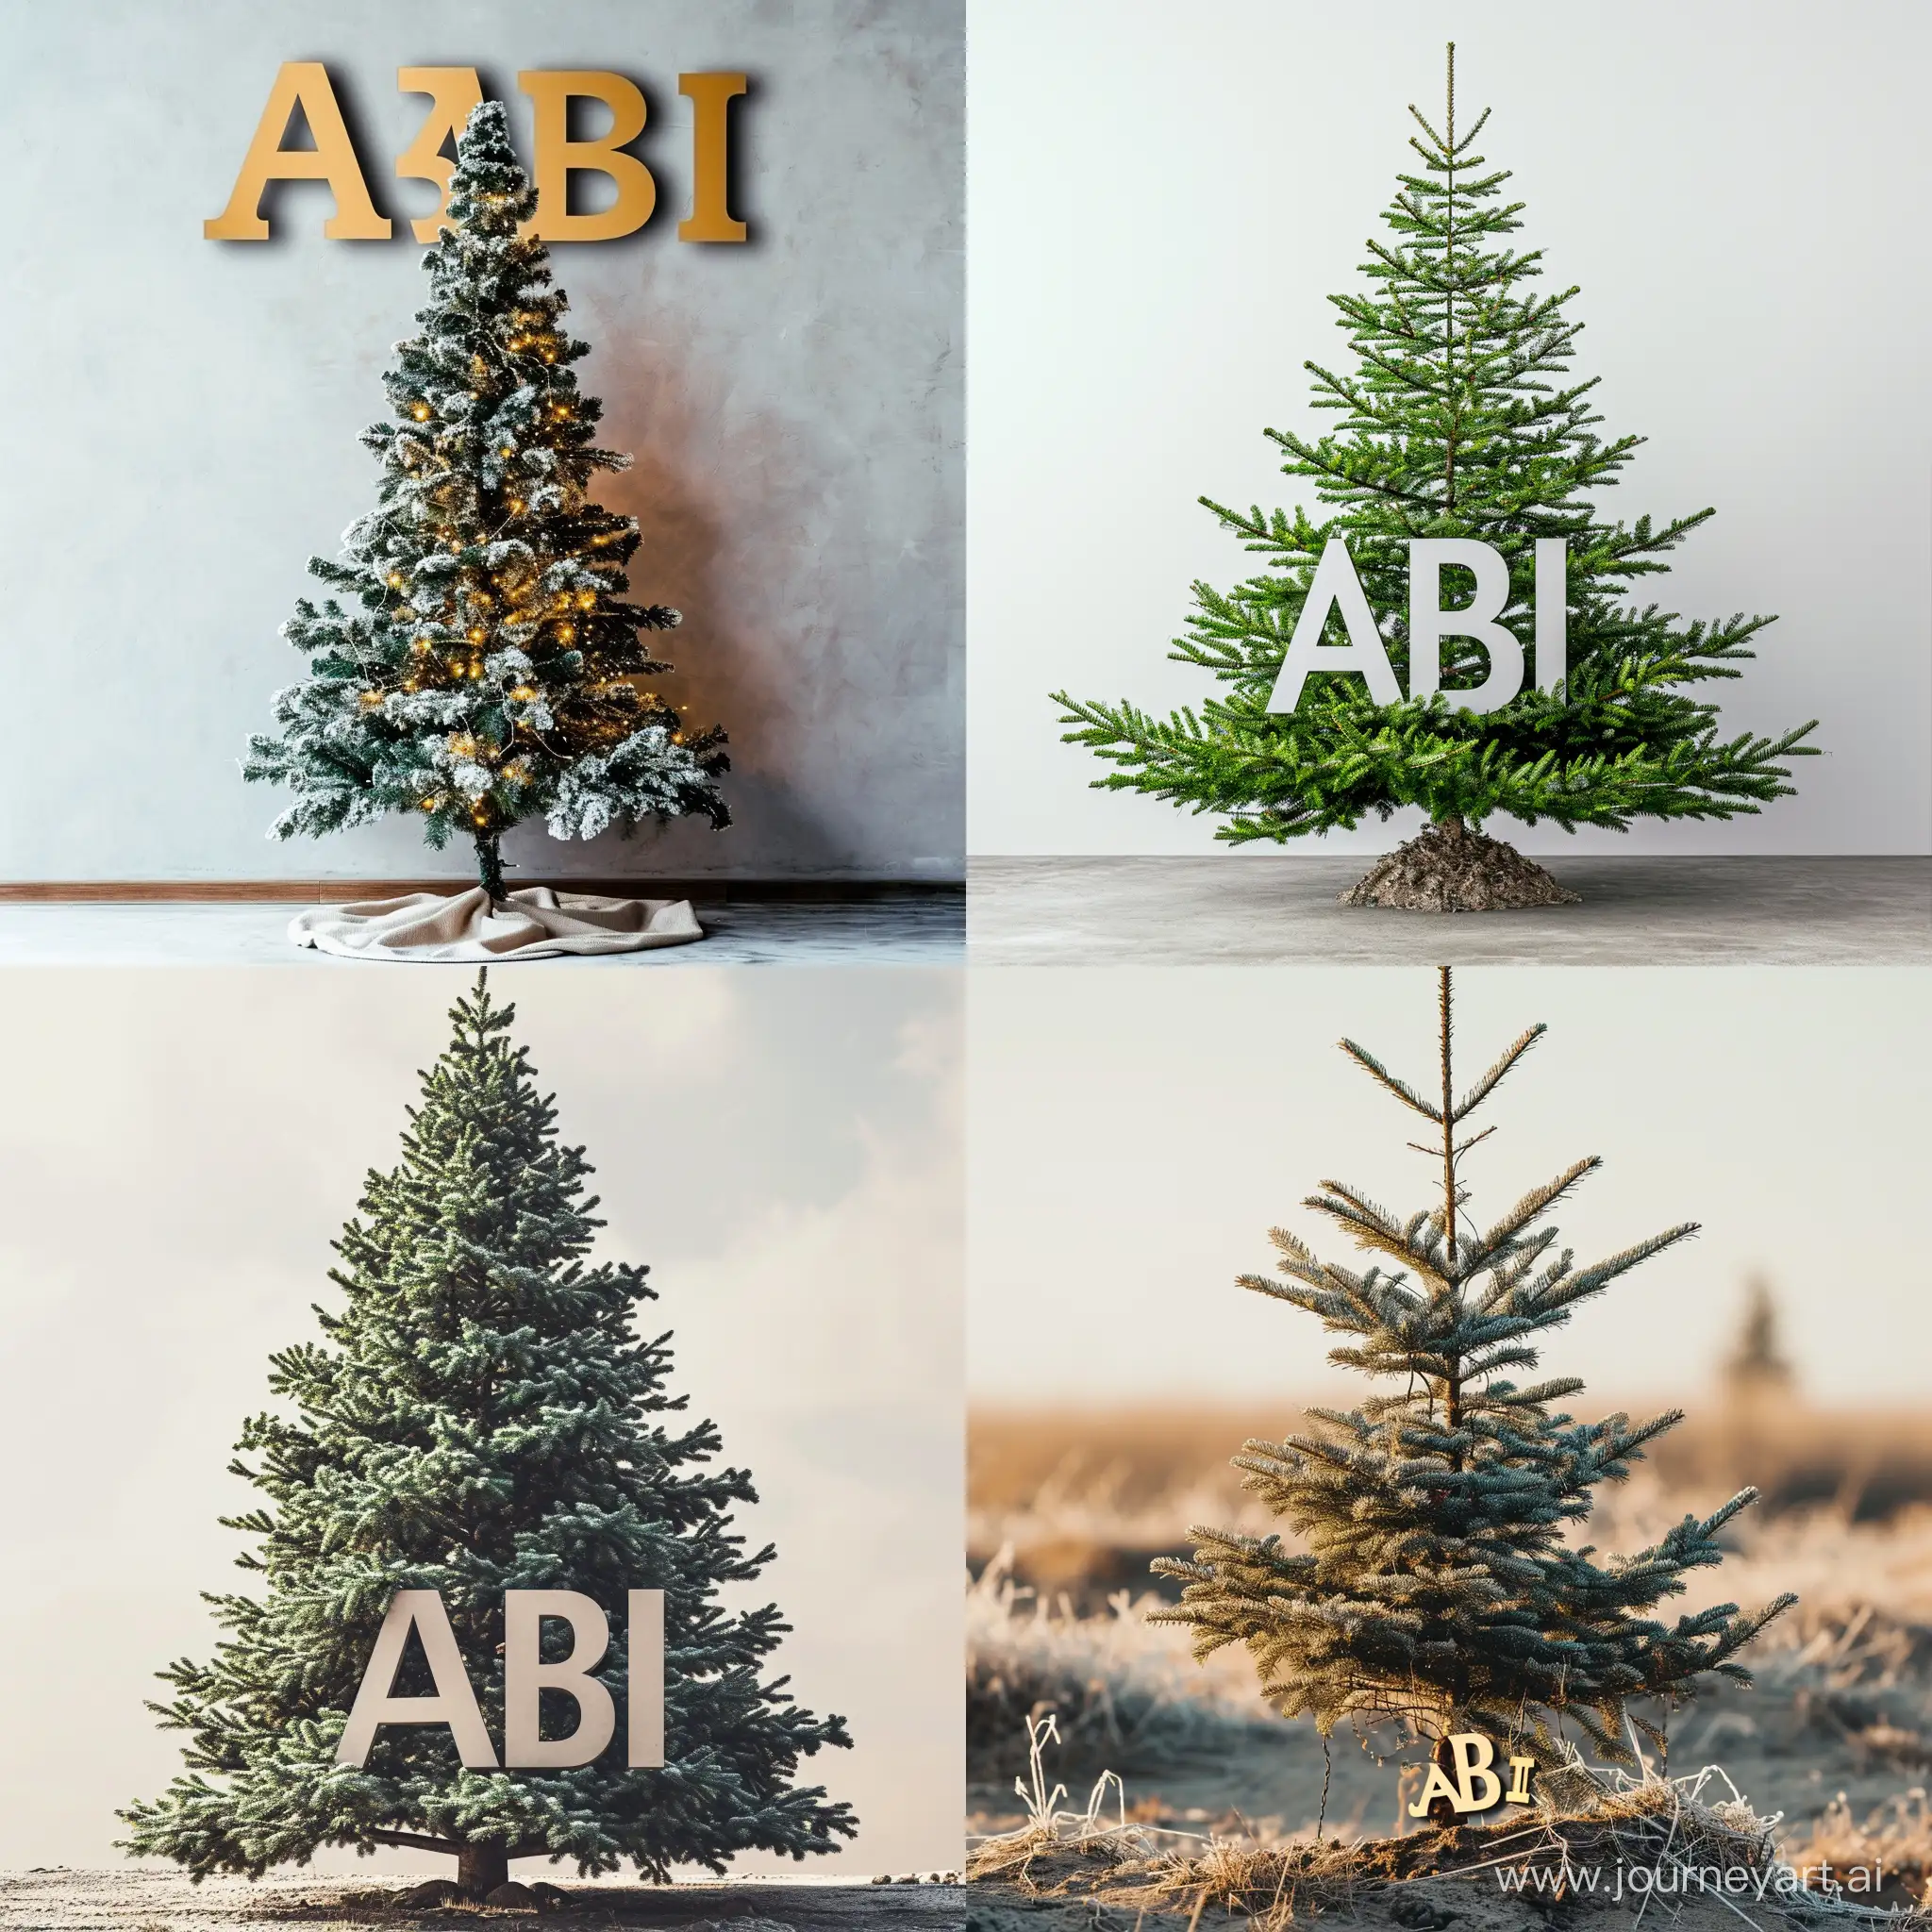 Festive-Christmas-Tree-with-Minimalistic-ABI-Text-on-Clear-Background